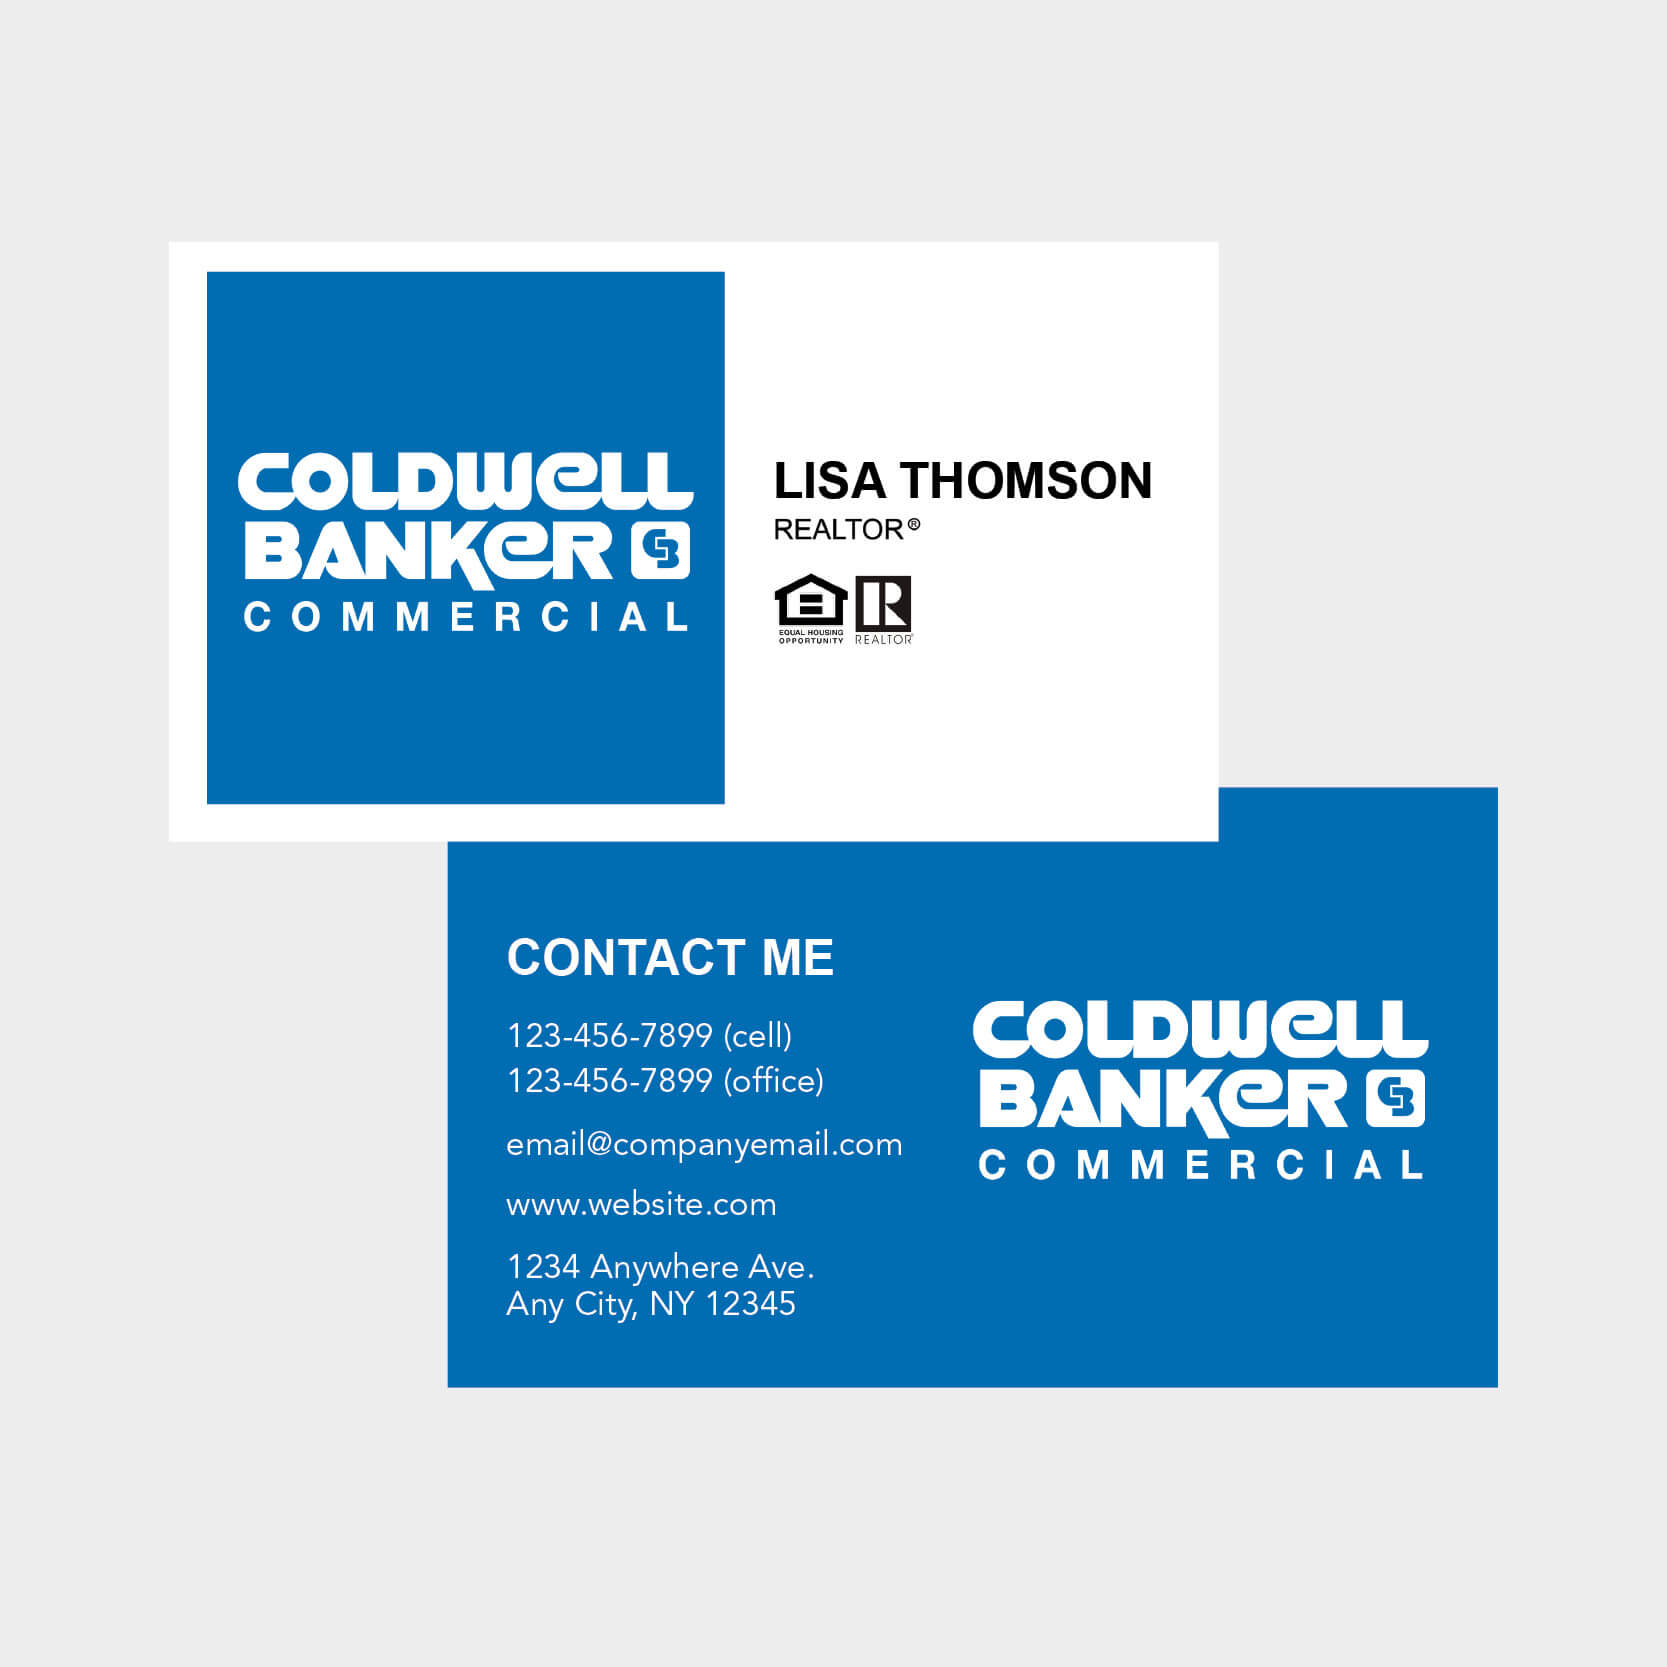 Coldwell Banker Business Cards Within Coldwell Banker Business Card Template